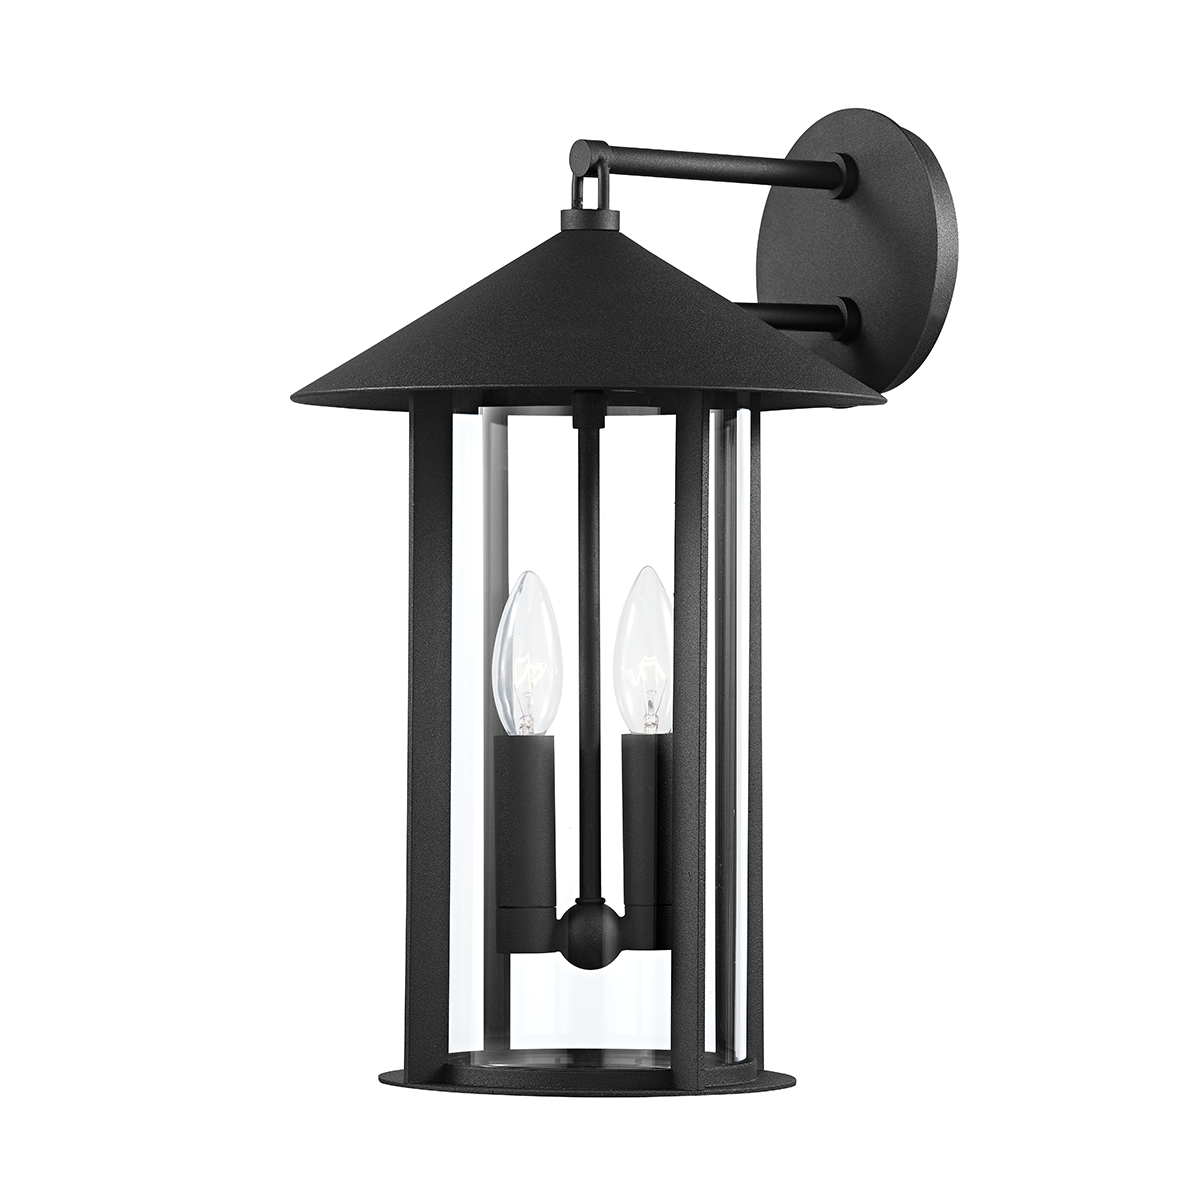 Troy LONG BEACH 2 LIGHT EXTERIOR WALL SCONCE B1952 Outdoor l Wall Troy Lighting TEXTURE BLACK  